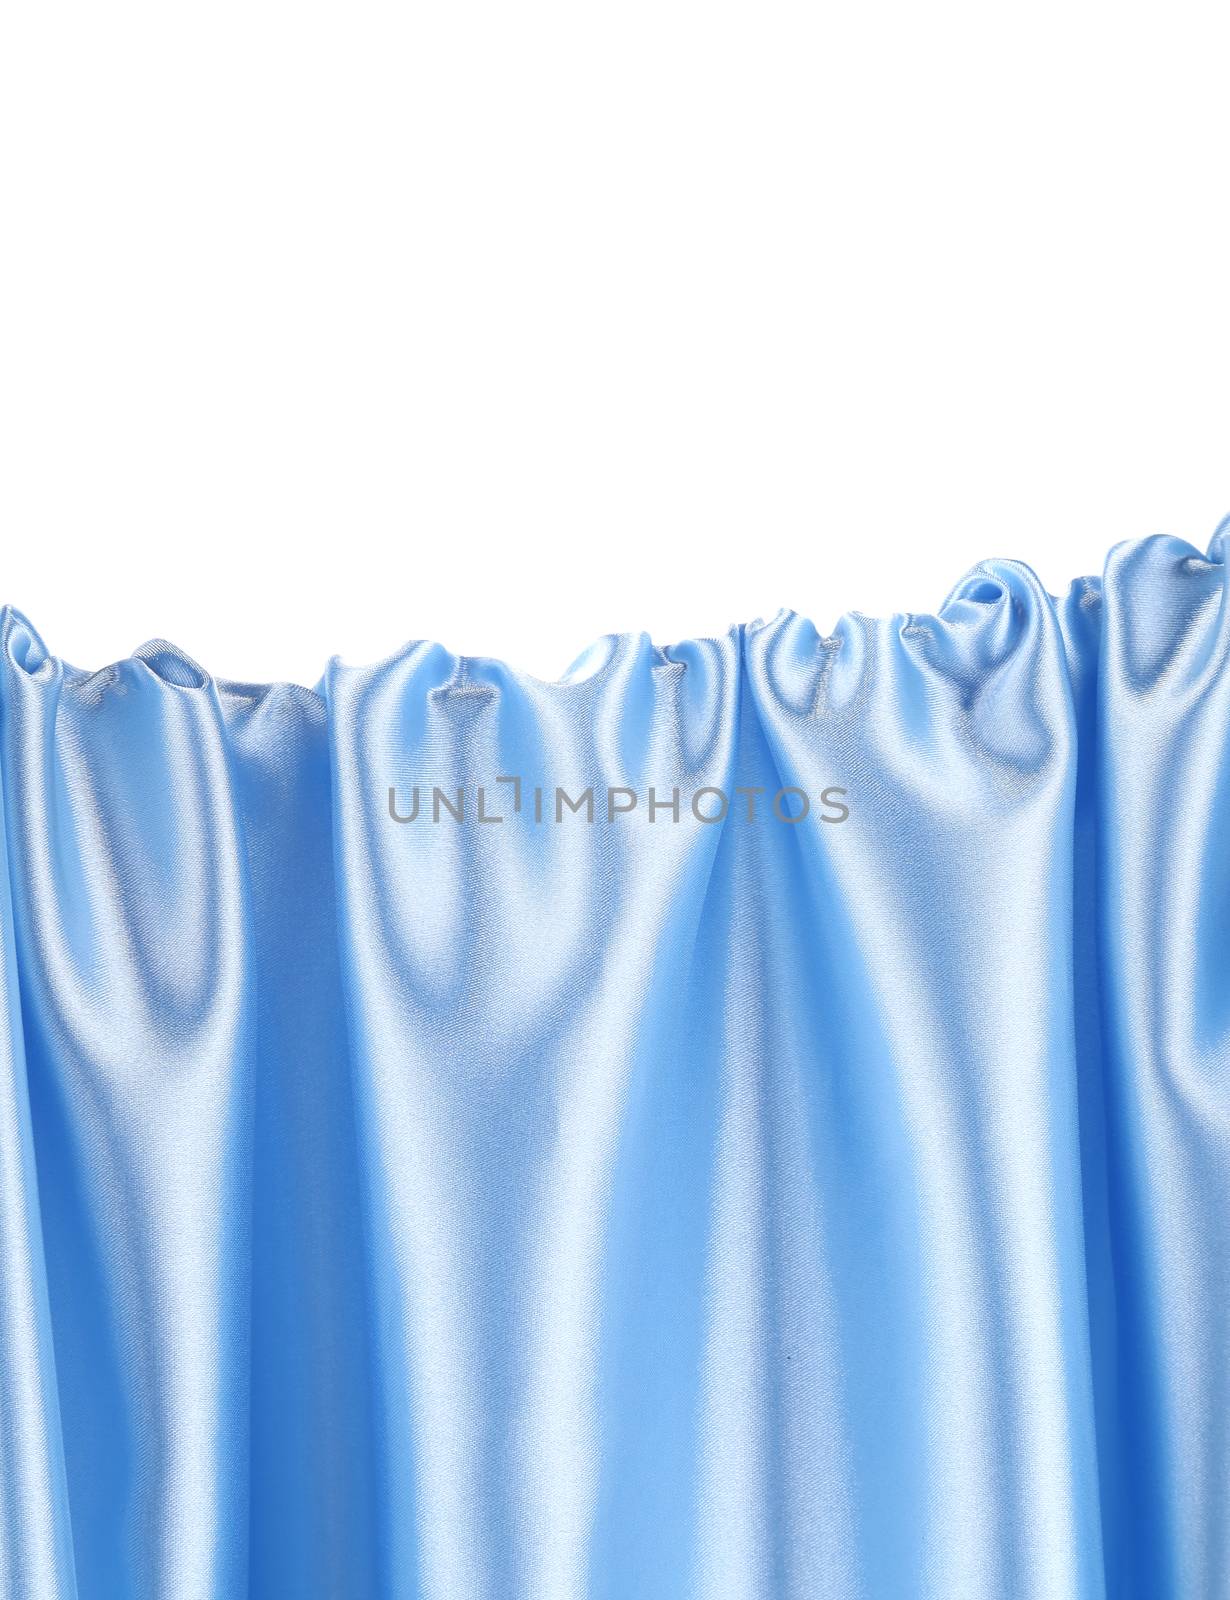 Light blue cloth. On a white background. Place for text.